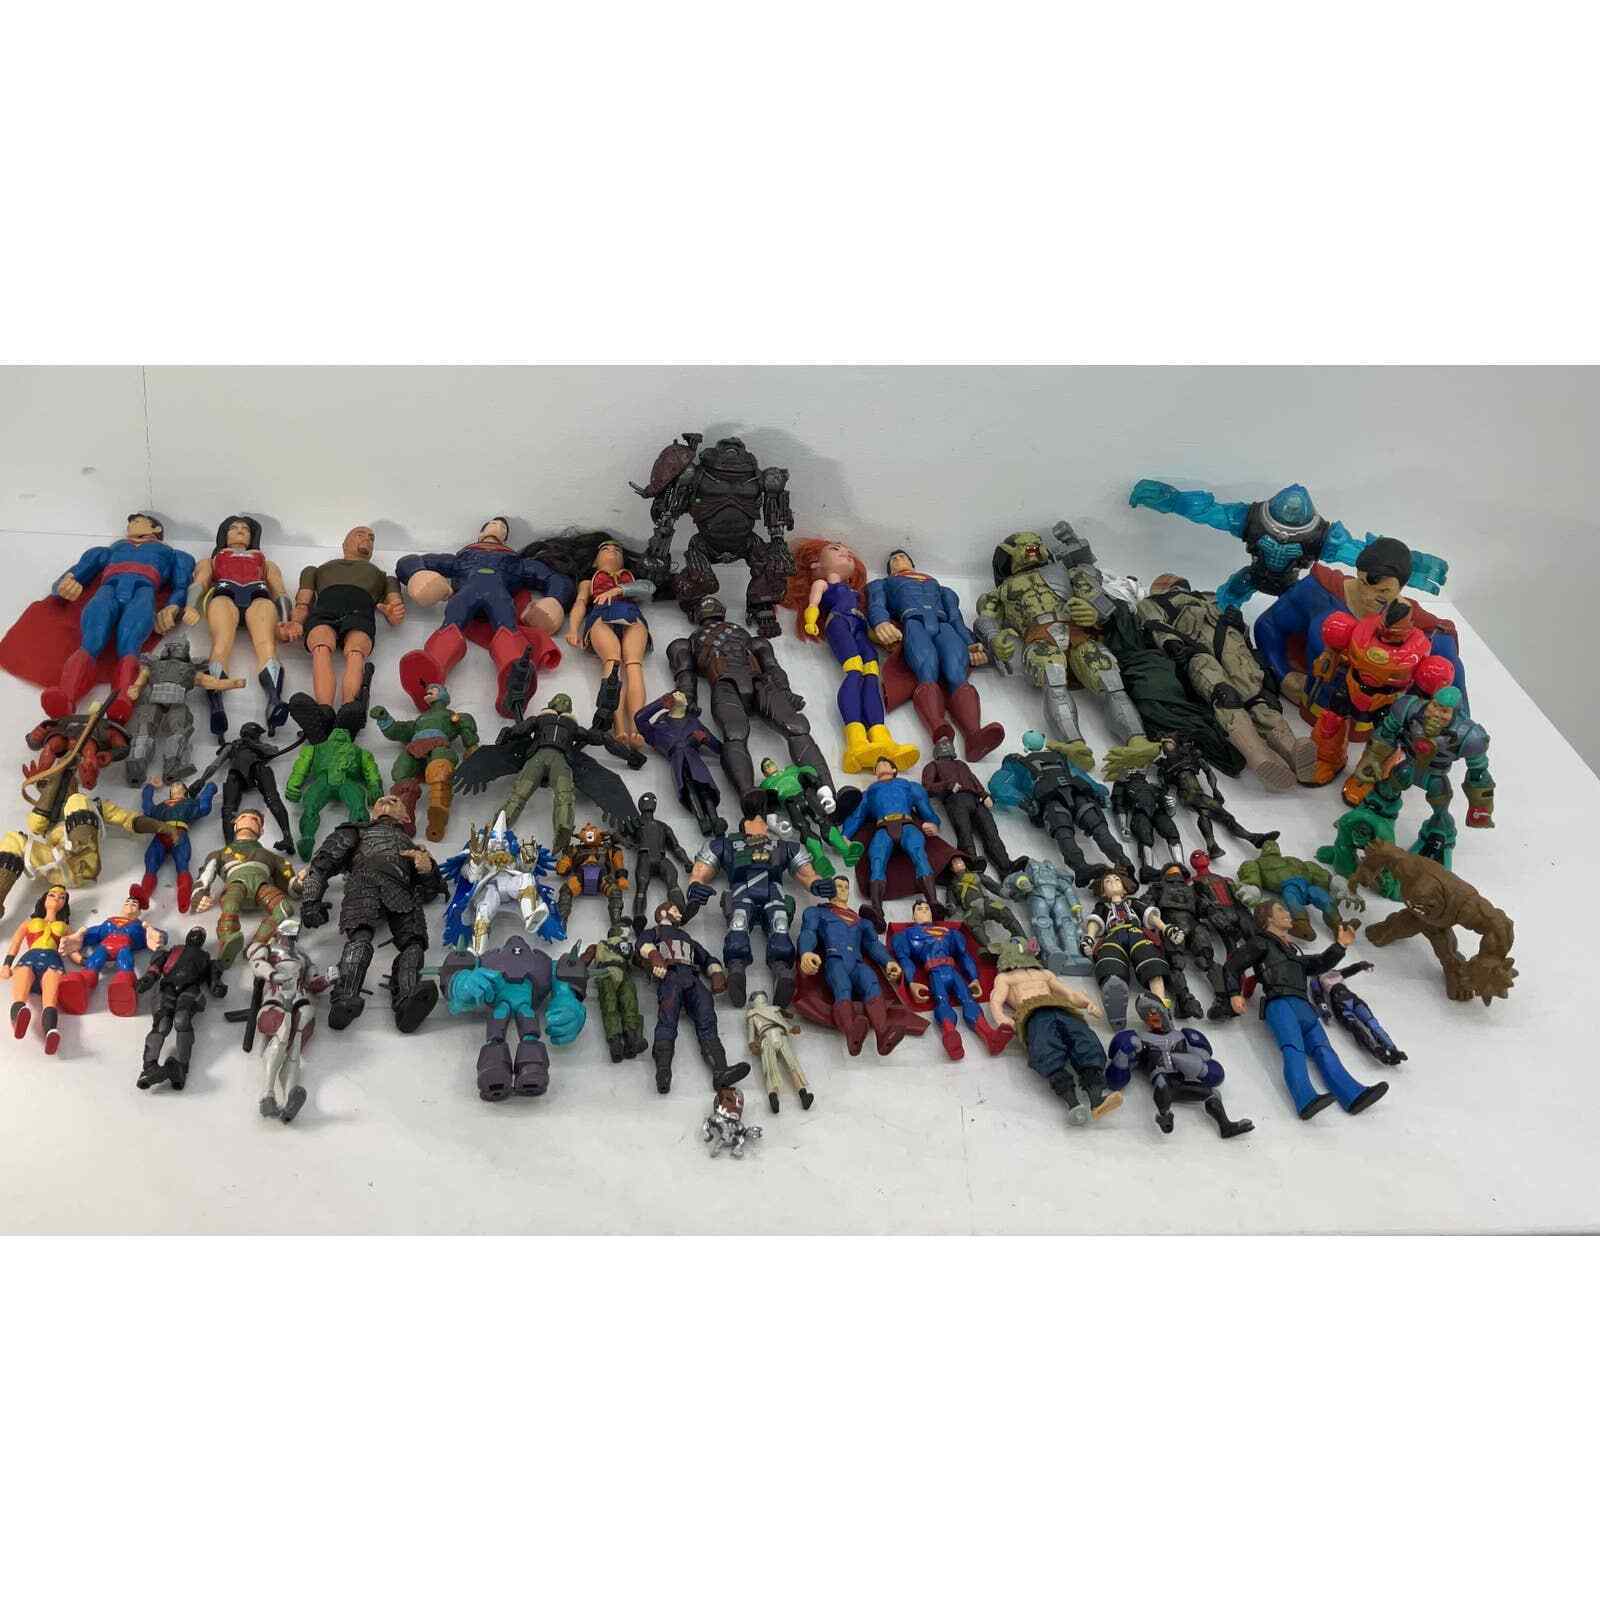 Mixed LOT of 20 lbs Super Hero Villains Action Figure Toys Marvel DC Ben 10 Used